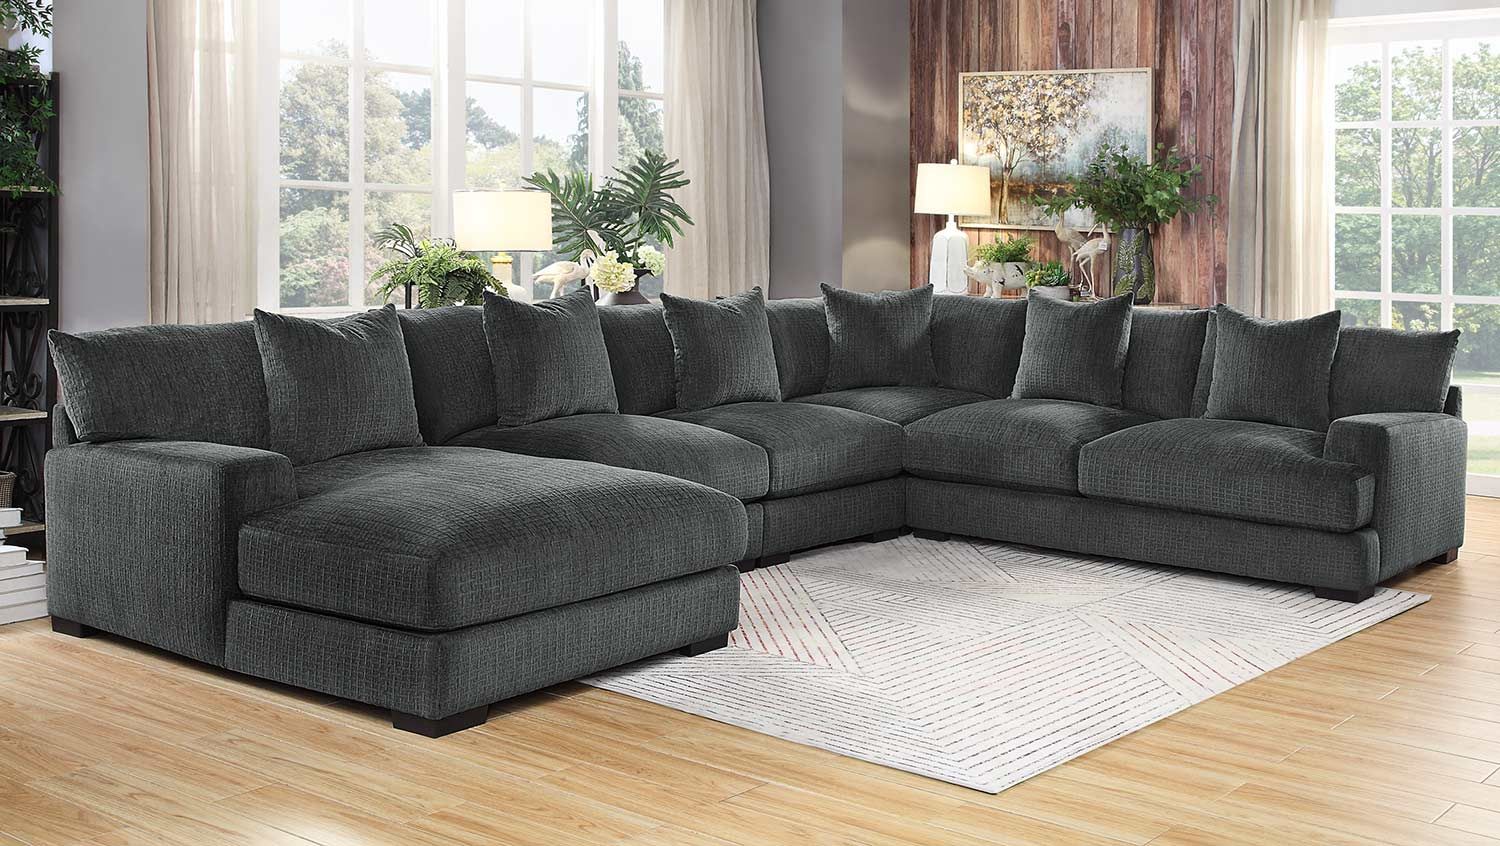 Homelegance Worchester Sectional Sofa Set – Dark Gray 9857dg Sofa Set |  Homelegance Elegancefurnituredirect Within Dark Gray Sectional Sofas (Photo 1 of 15)